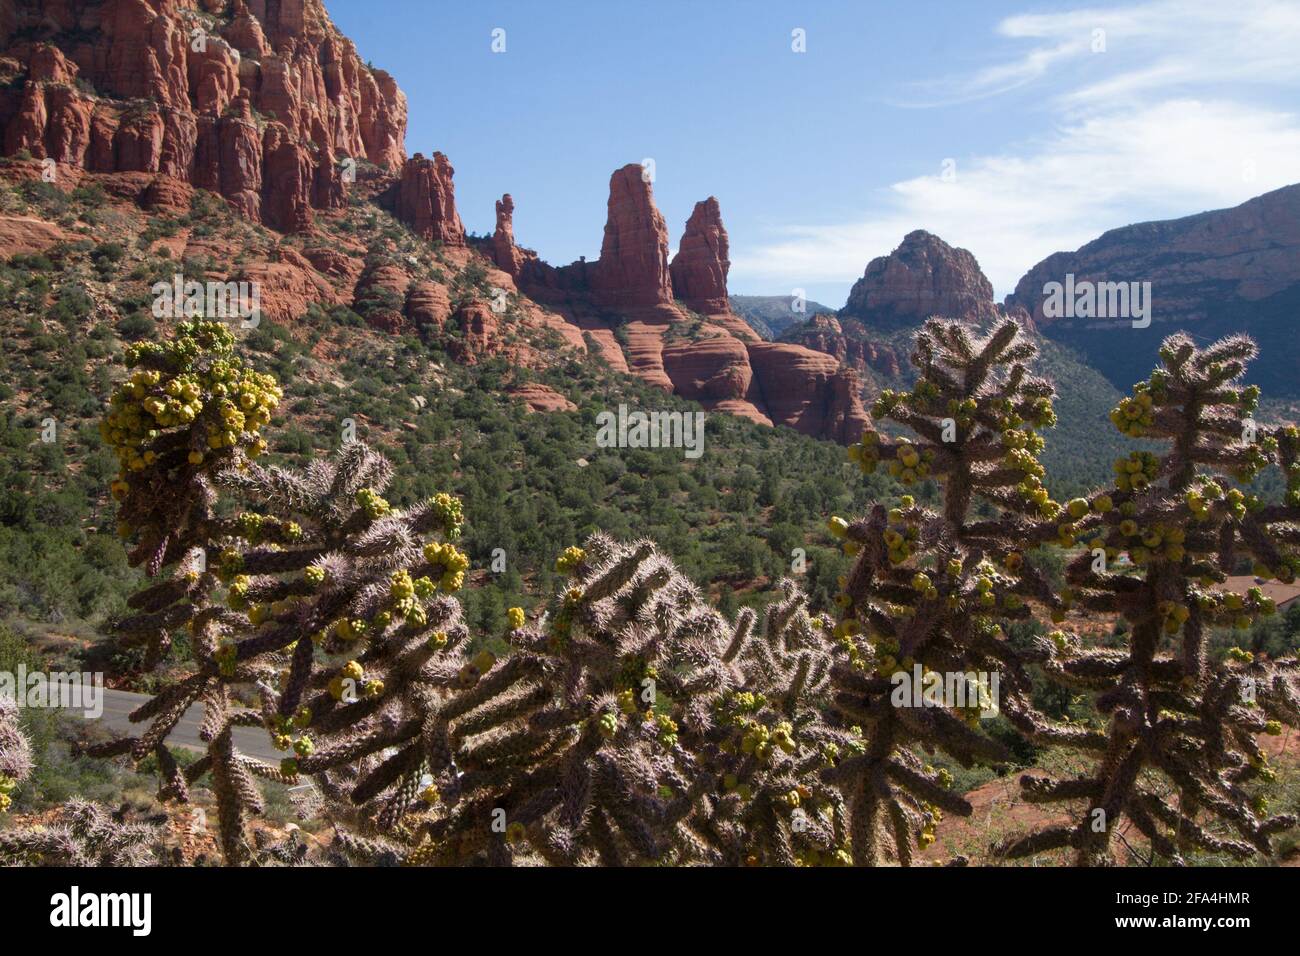 Sedona is a small city near Flagstaff, Arizona. Famous for its red rock canyons and visitors looking for its supposed magnetic powers. Sedona is a cen Stock Photo